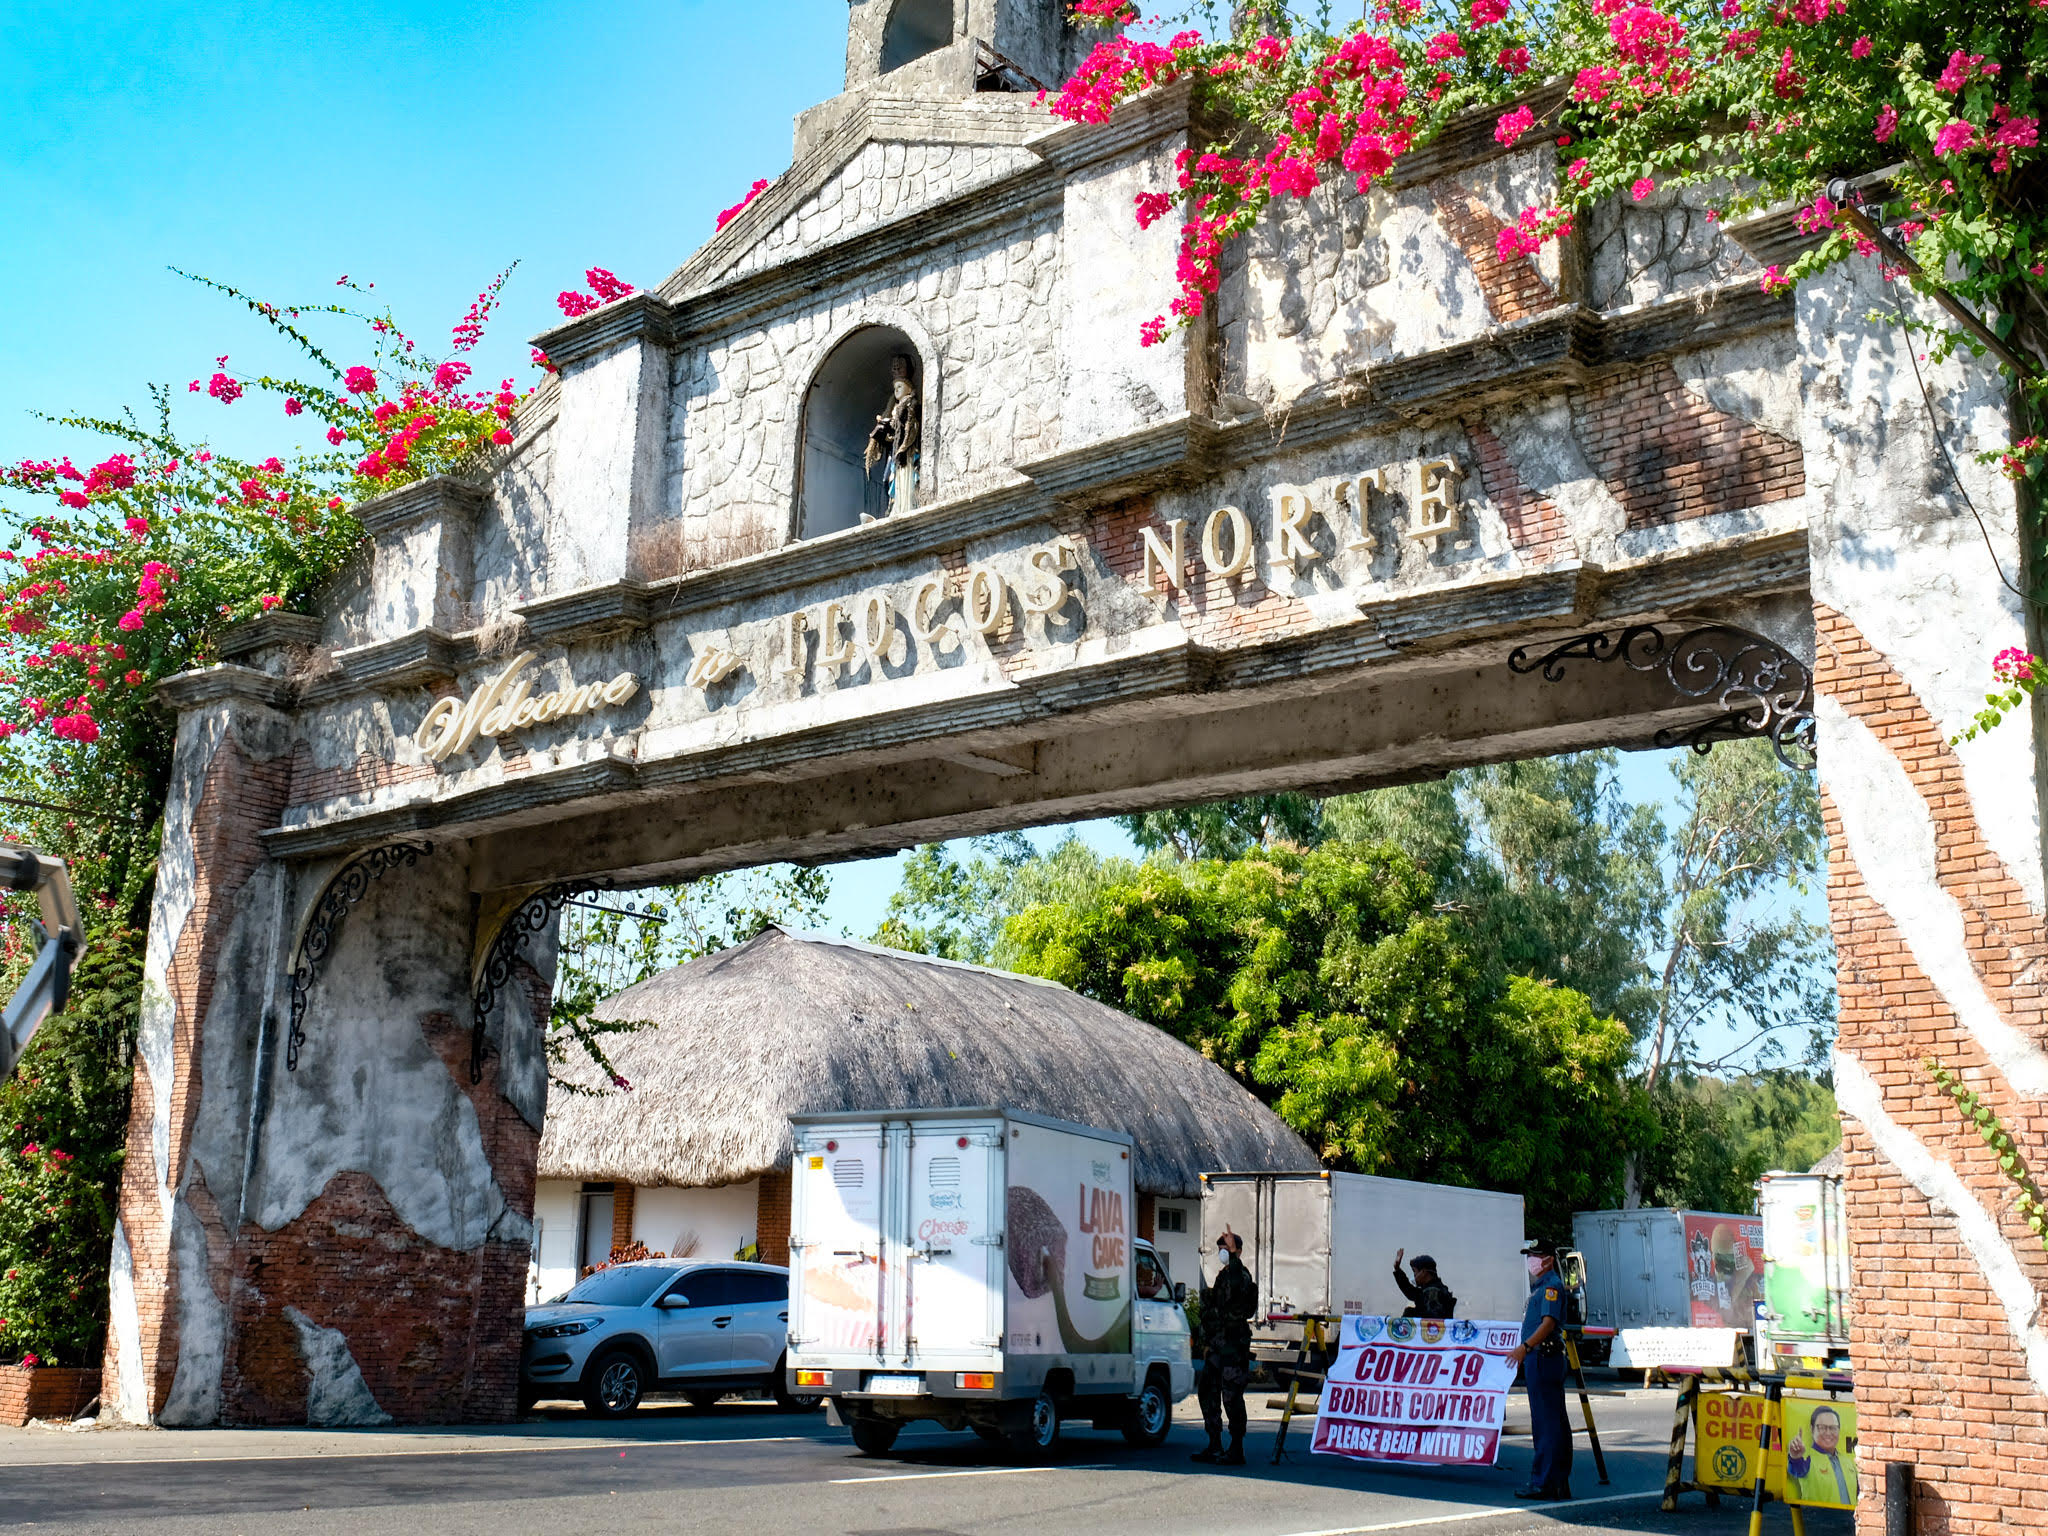 A strict border checkpoint is set up in Ilocos Norte to contain the spread of COVID-19